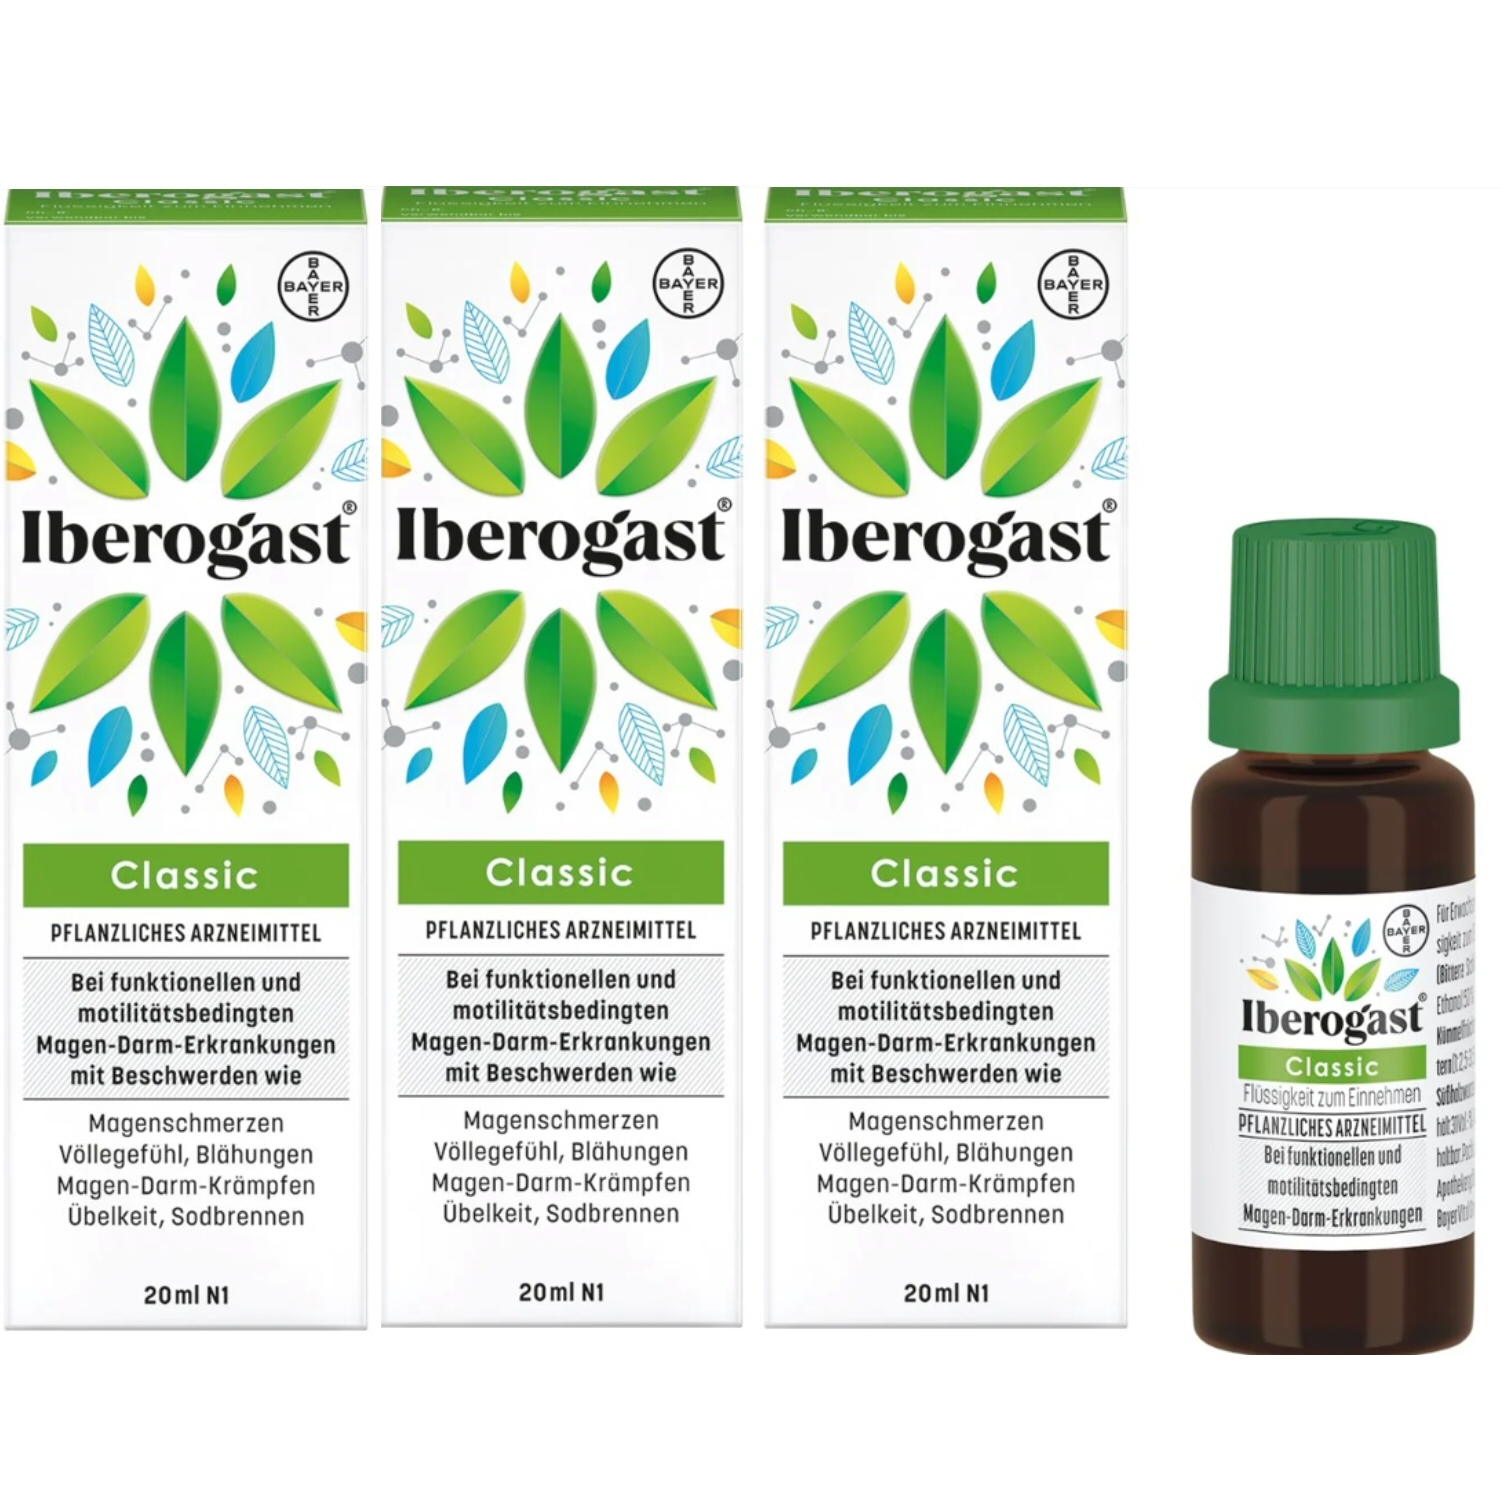 3 PACK Iberogast drops for stomach pain, cramps, nervous stomach 20 ml, Bayer - $45.99